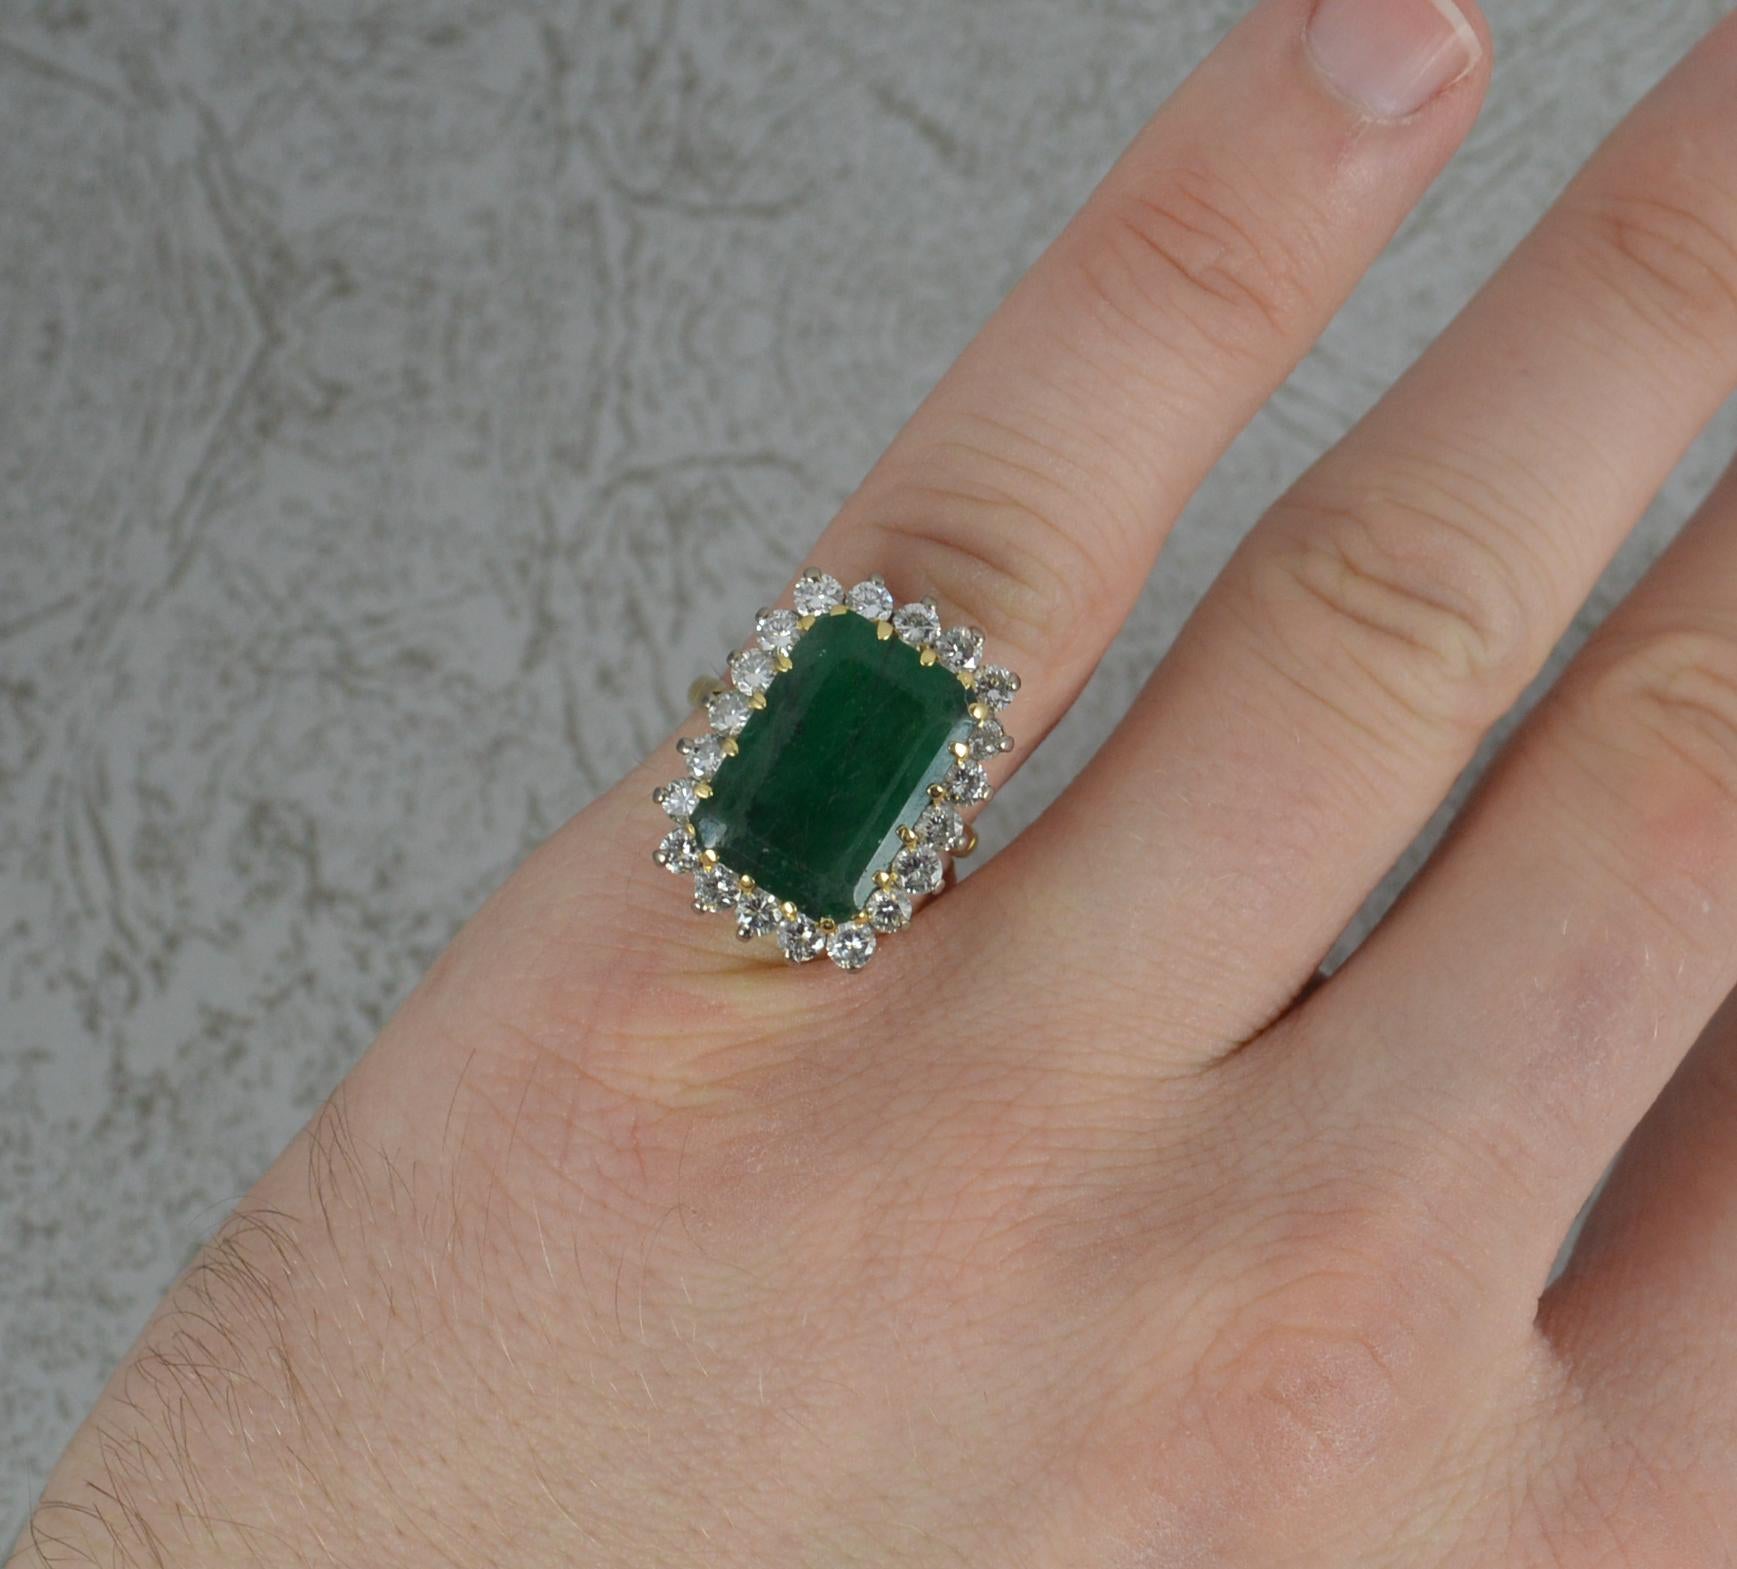 A superb Emerald and Diamond cluster ring.
Modelled in an 18ct yellow gold with a white gold head setting.
Designed with an emerald cut emerald to centre. 10.1mm x 14.6mm approx 6cts. Surrounding are twenty natural round brilliant cut diamonds. Each